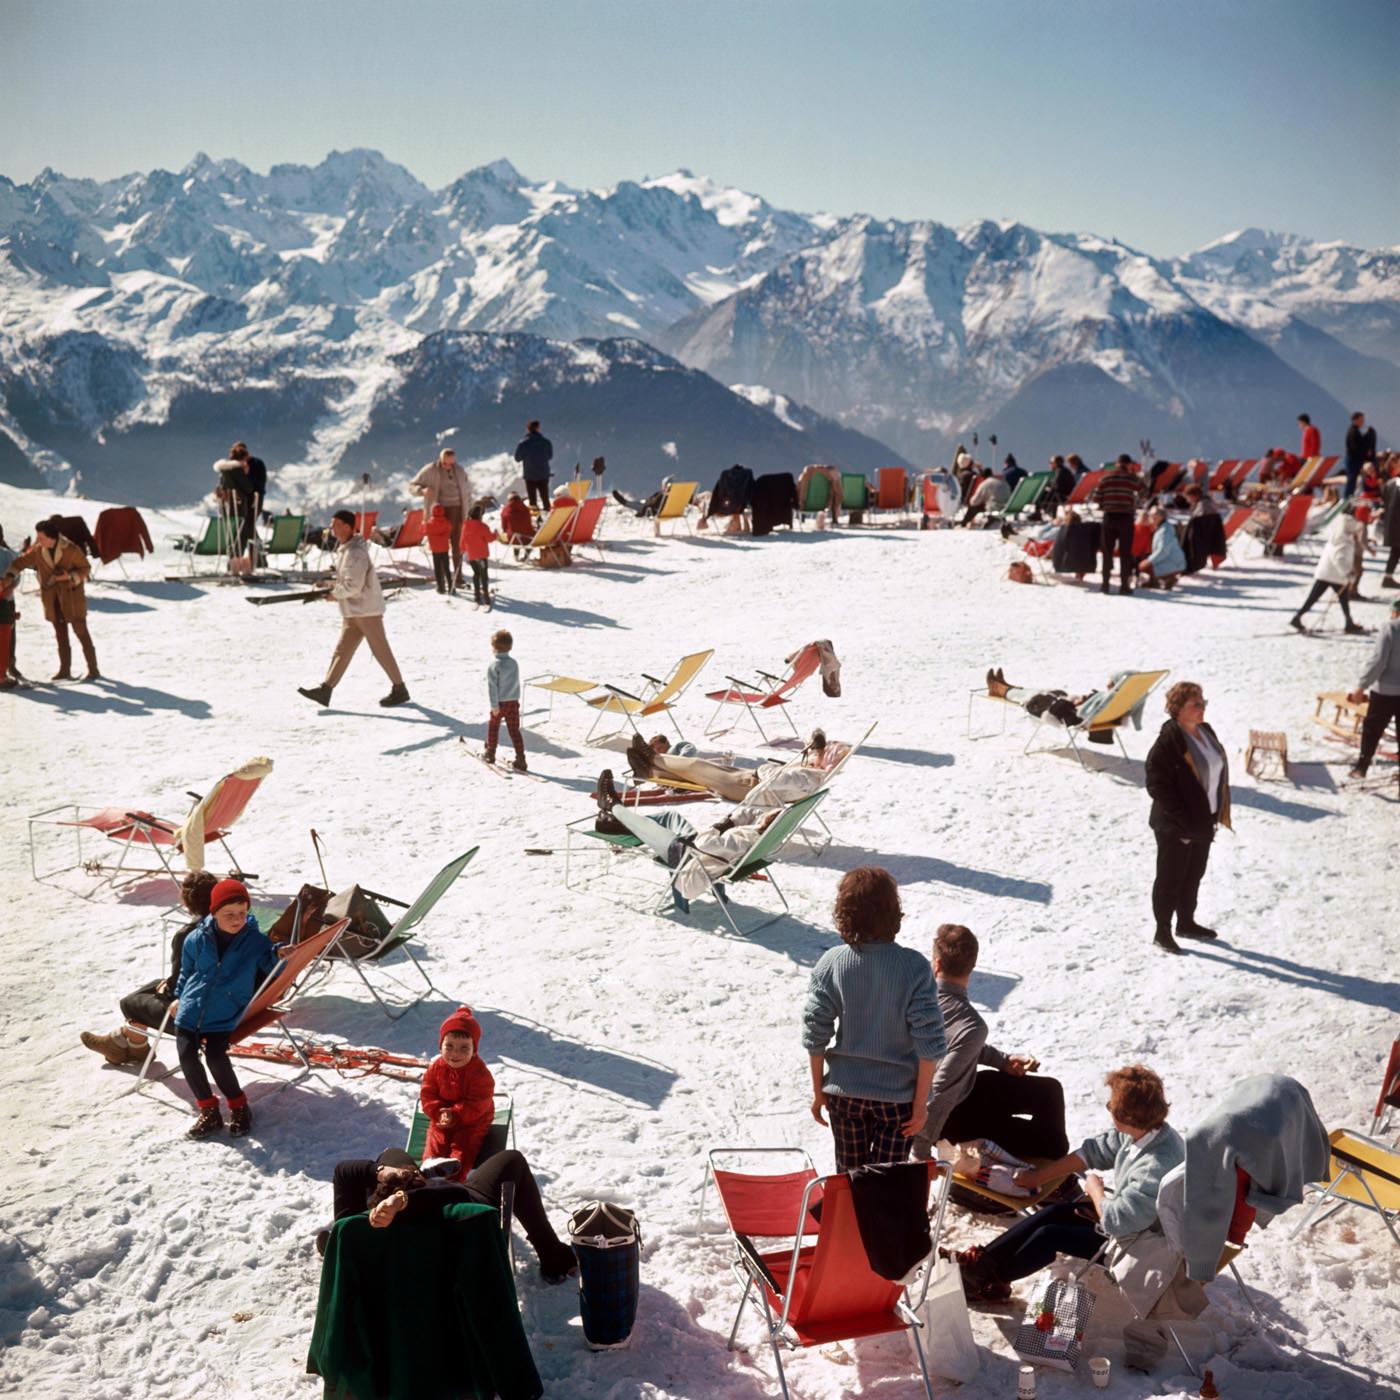 Verbier Vacation Estate Ed. Photograph, Swiss Alps skiers in red, blue, green